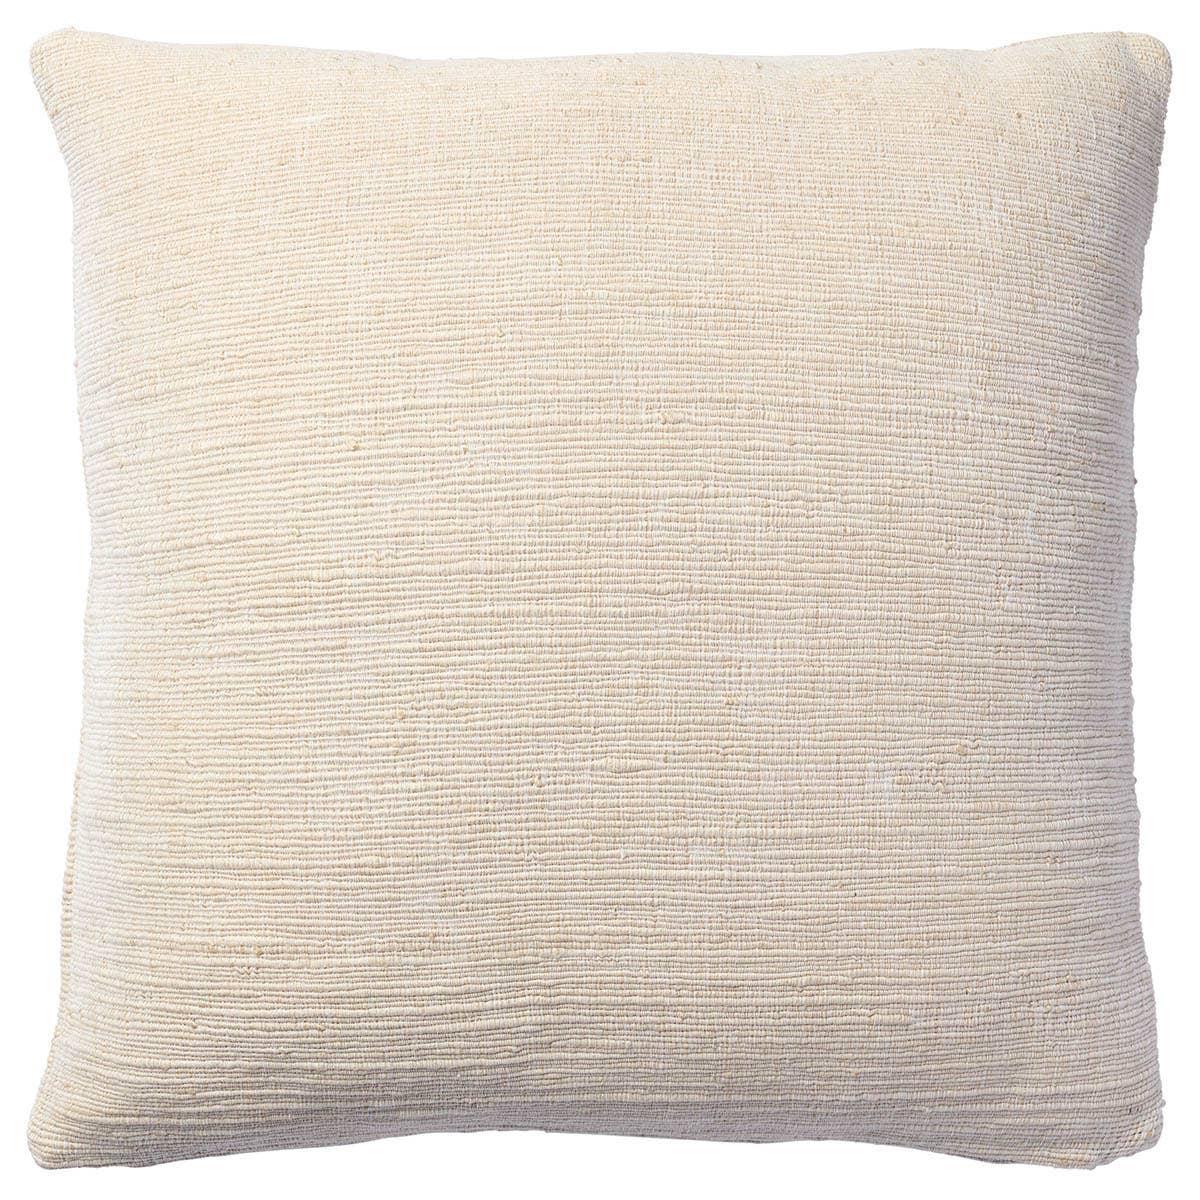 Traditionally, the warp yarn is the framework over which the weft yarn is woven to create a pattern, but in the Mirth pillow they are given an equal emphasis. Inspired by the foundation of handcrafted rugs, this throw pillow provides subtle texture in warm cream tones. The viscose and cotton blend lends softness and comfort to any indoor space. Amethyst Home provides interior design, new home construction design consulting, vintage area rugs, and lighting in the Scottsdale metro area.